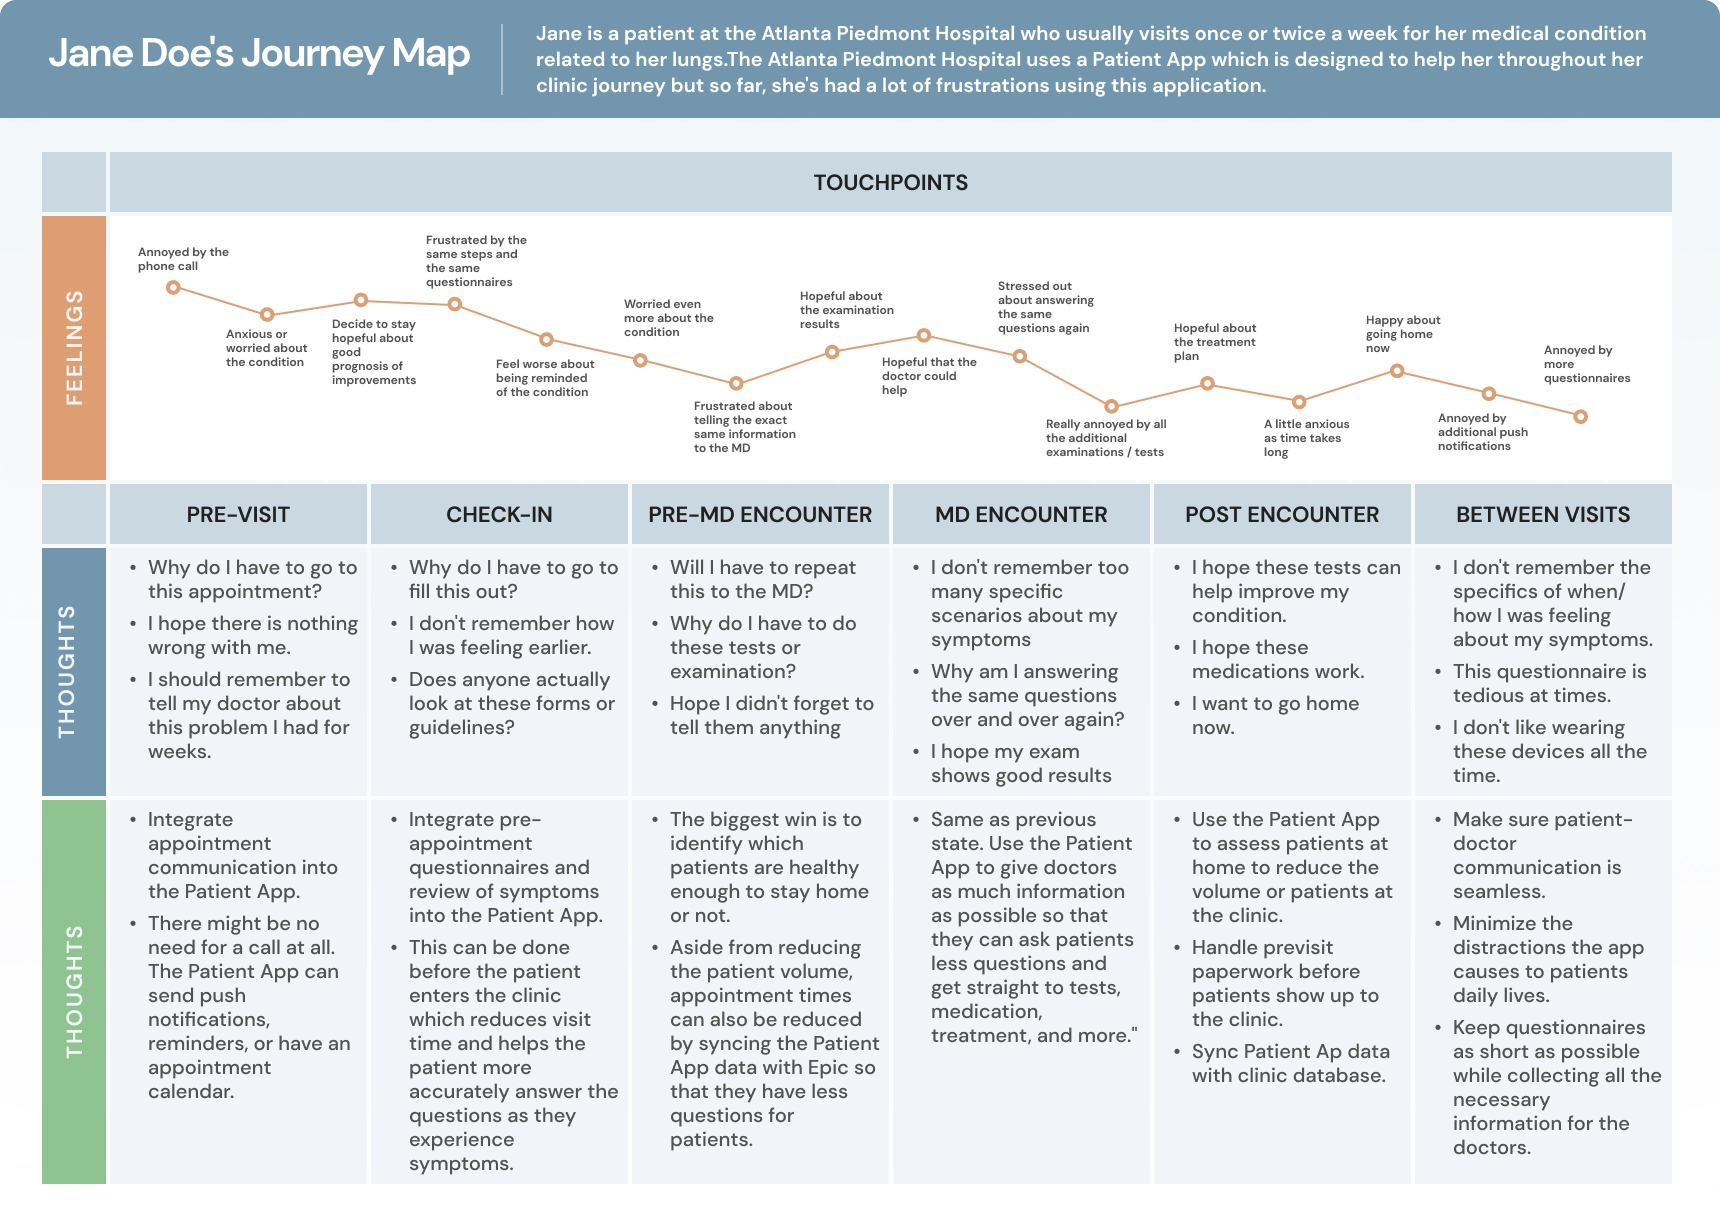 Example of a patient journey map